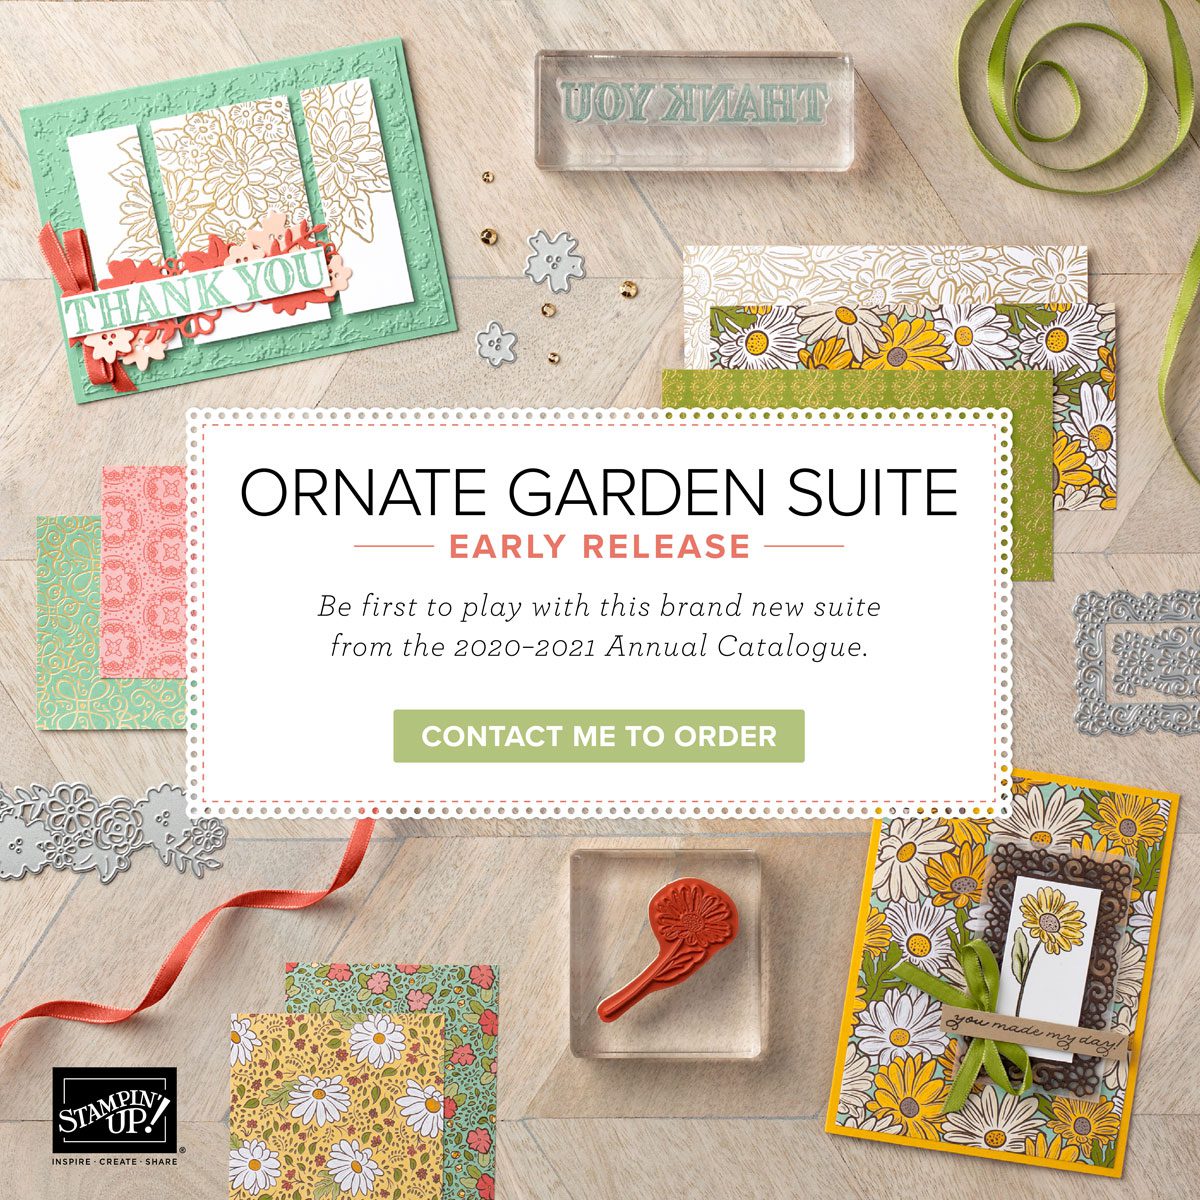 Ornate Garden Suite – Early Release